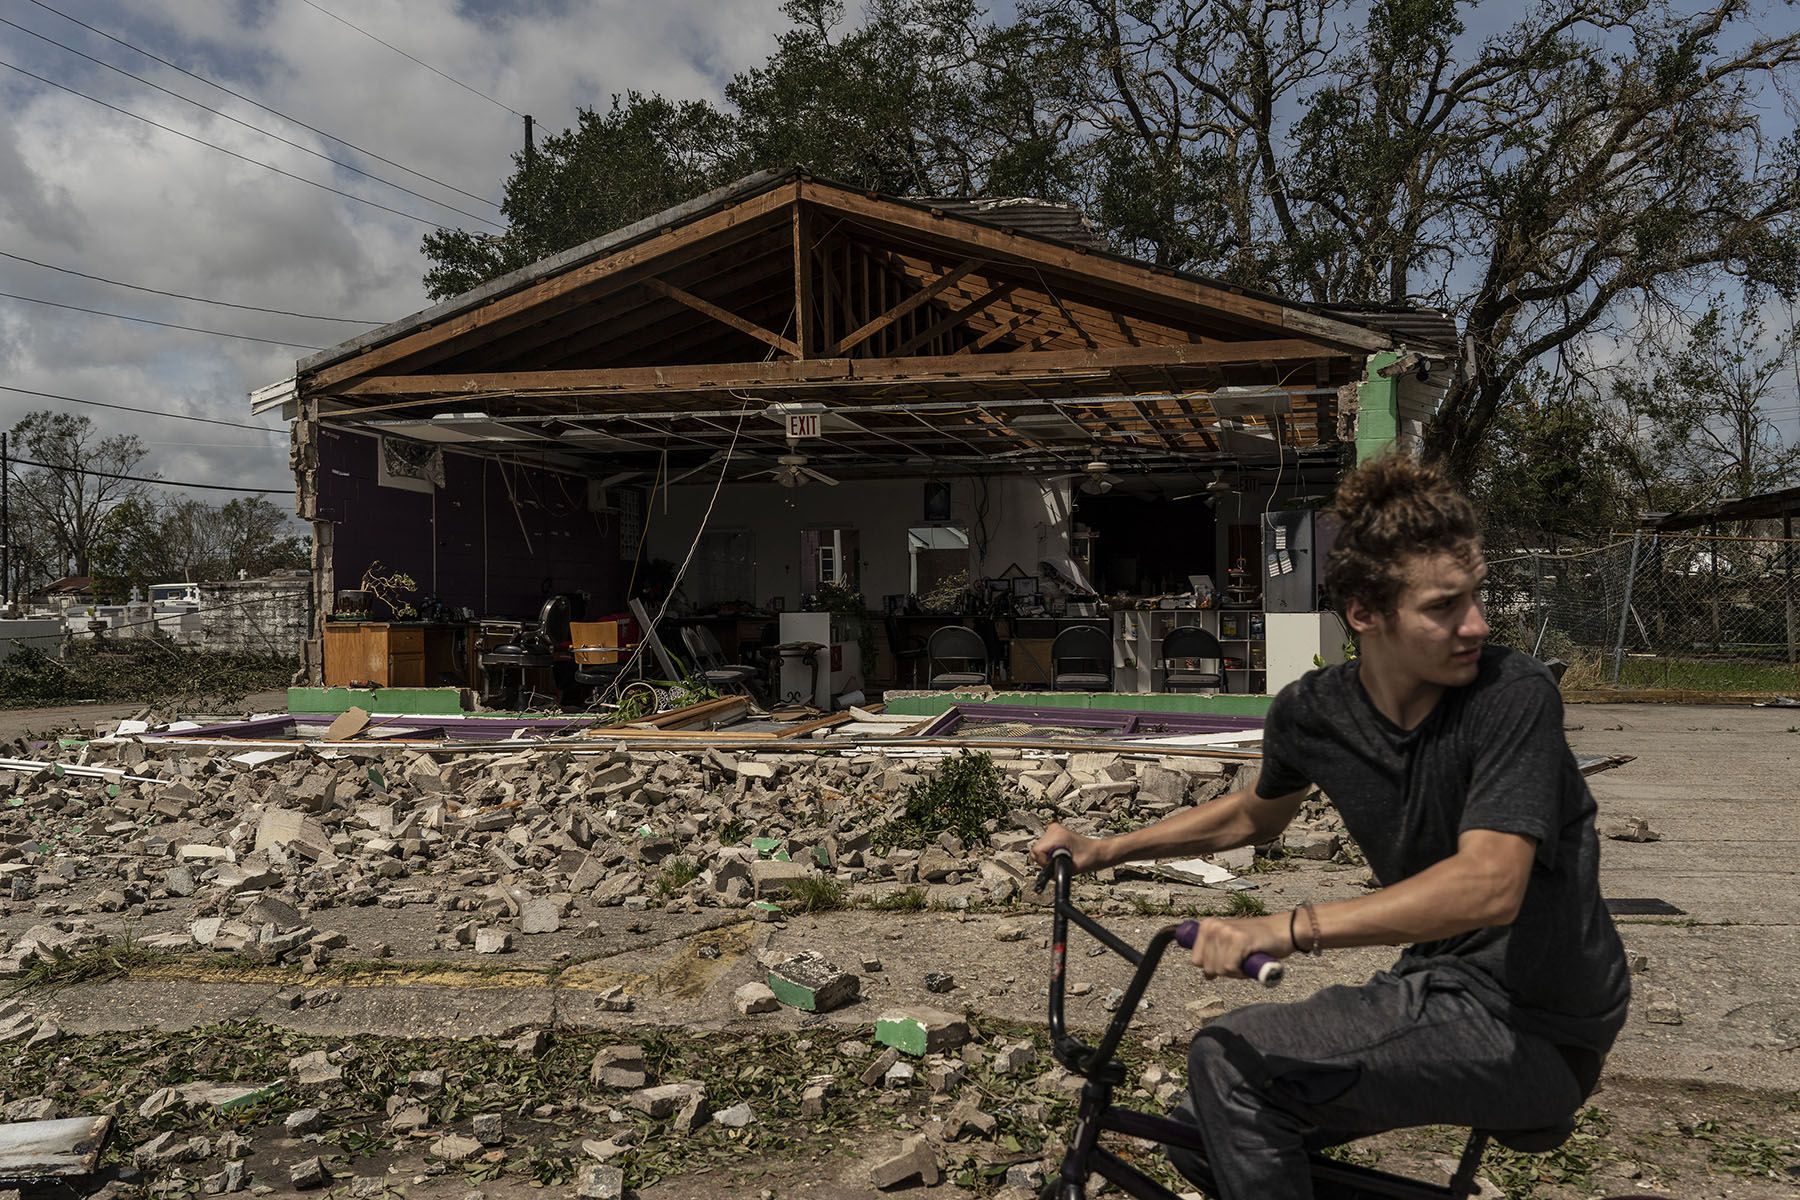 A man rides a bicycle in front of a damaged property.